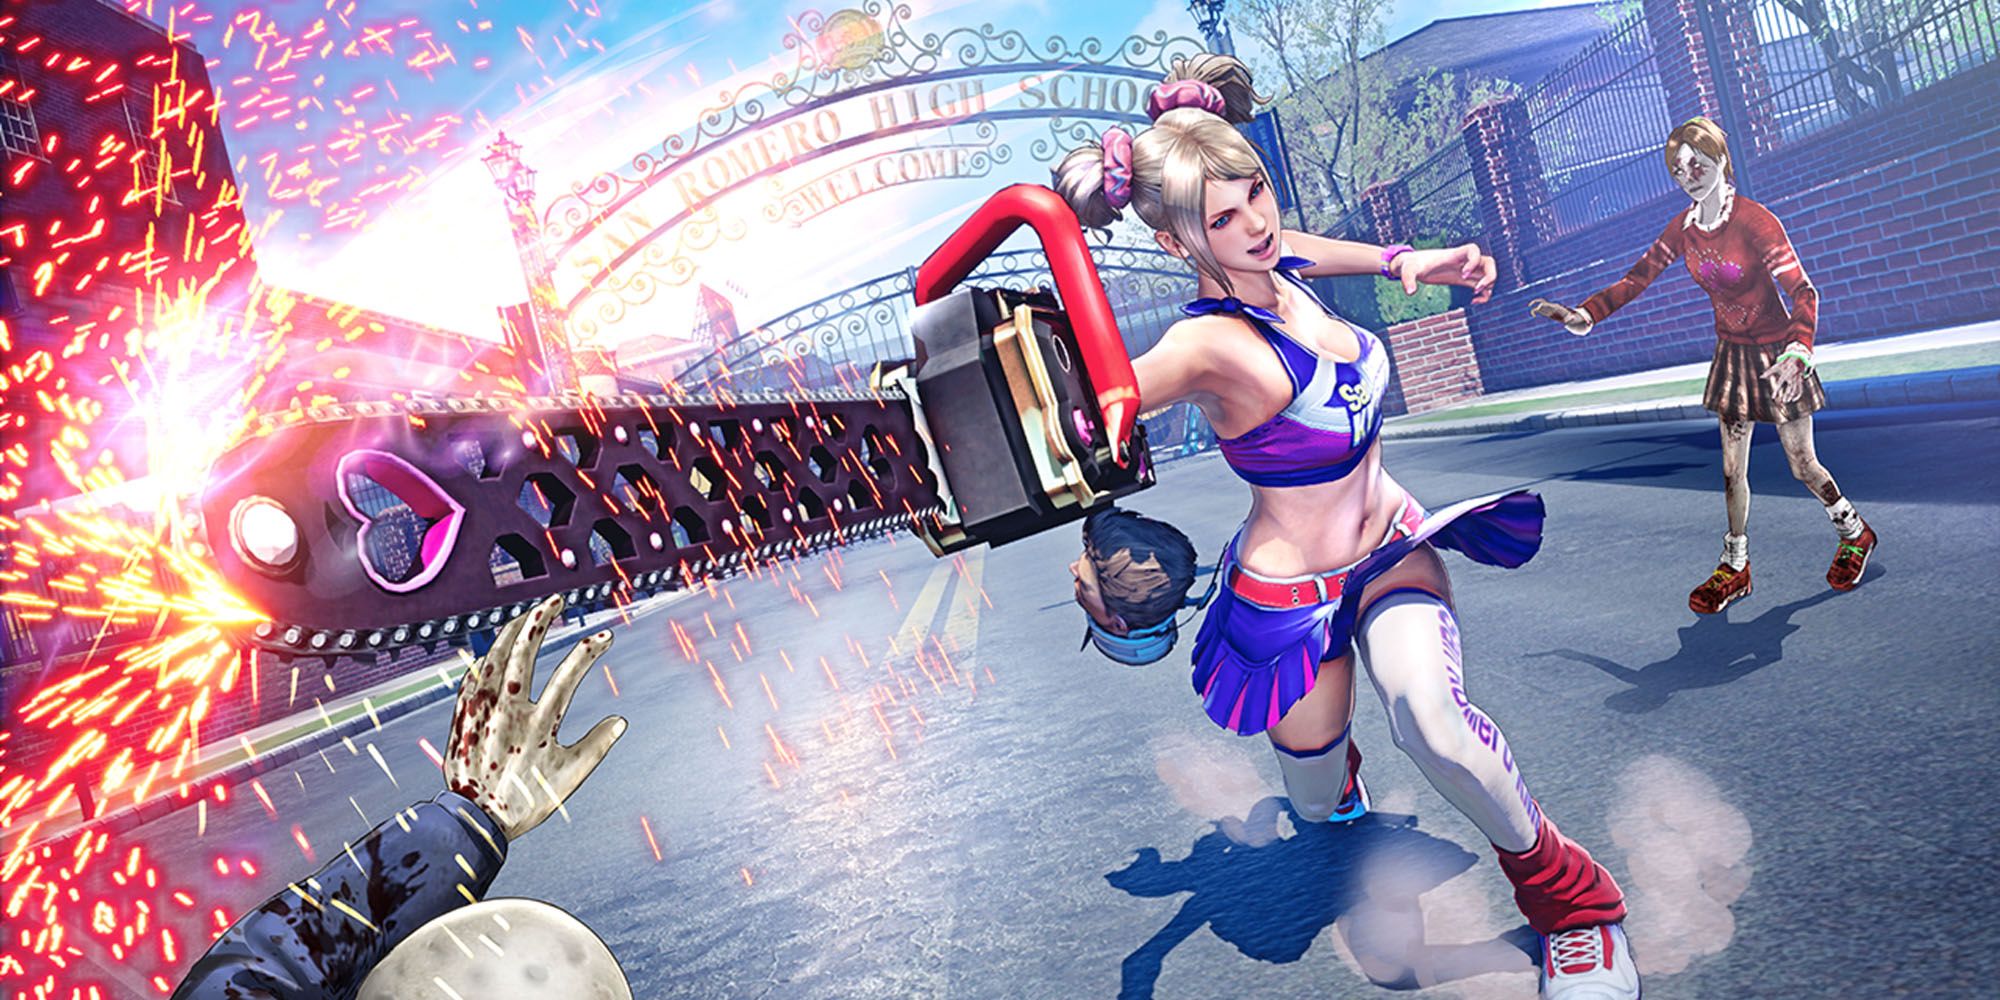 Lollipop Chainsaw key art showing Juliet Starling swinging a chainsaw toward the camera while a zombie stumbles behind her